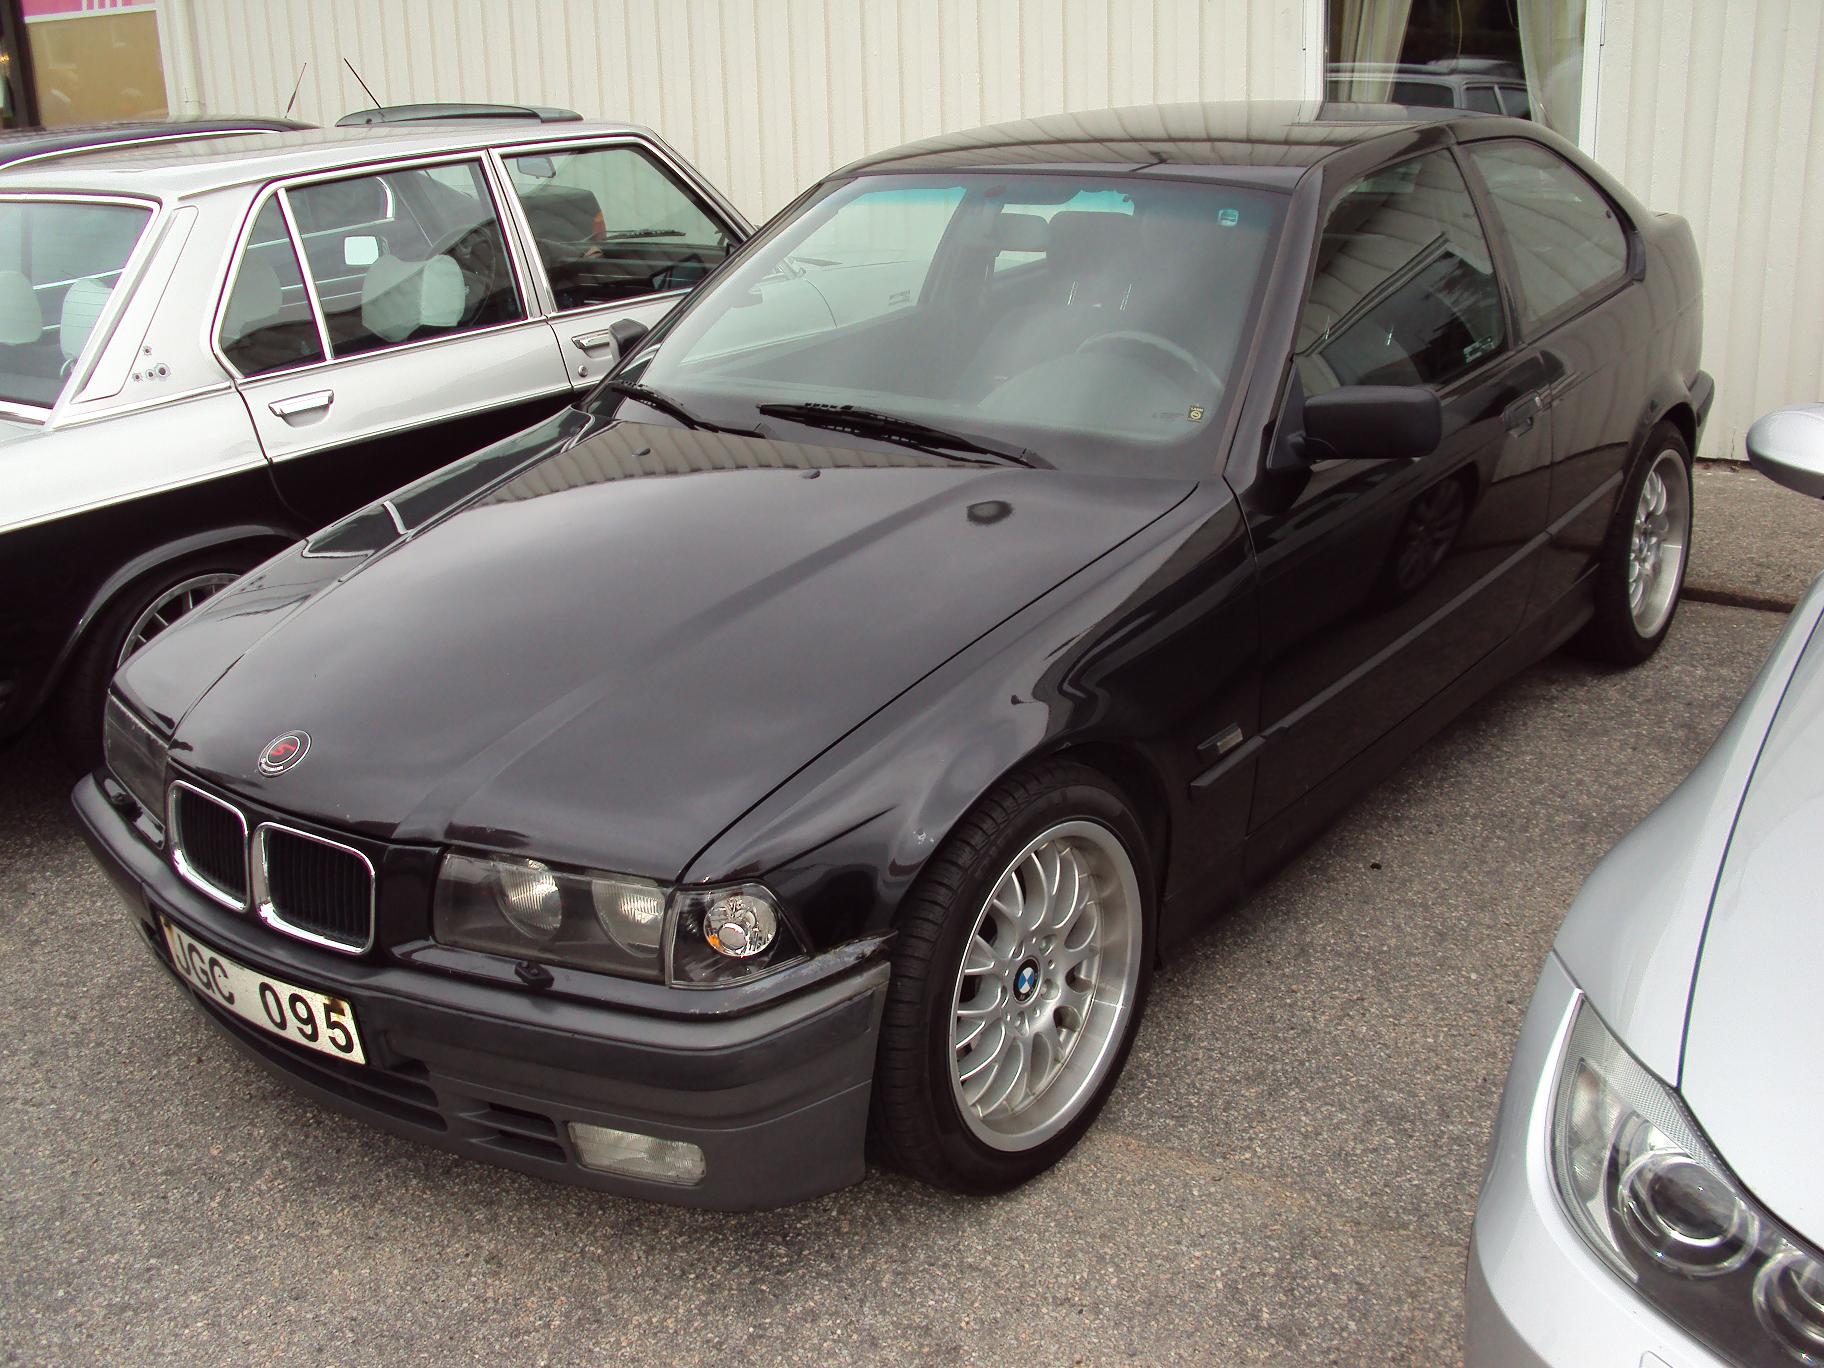 BMW 316i Compact | Flickr - Photo Sharing!